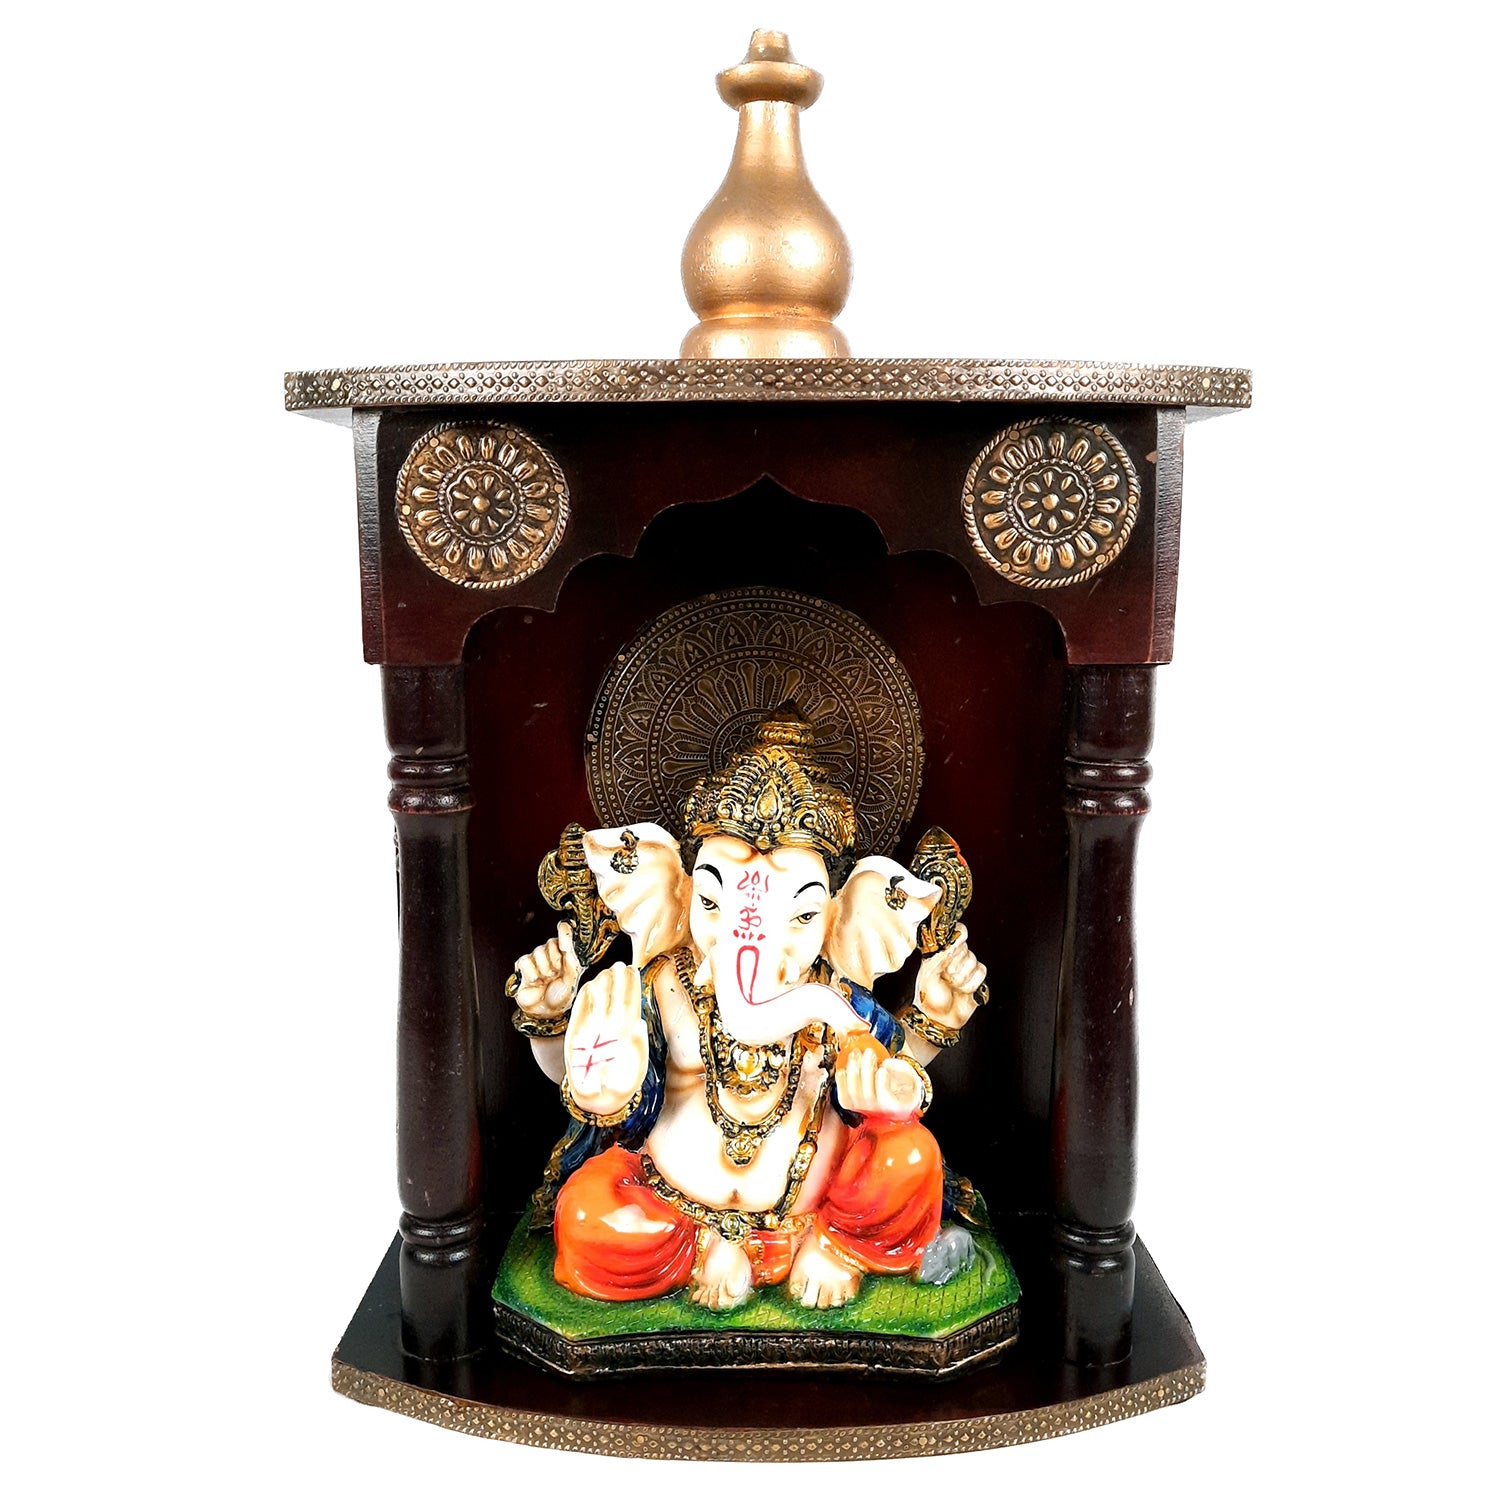 Pooja Mandir | Home Temple With Premium Wood Finish | Brass Puja Stand / Unit Wall Hanging – For Home, Ghar, Office, Shop - 18 inch - Apkamart